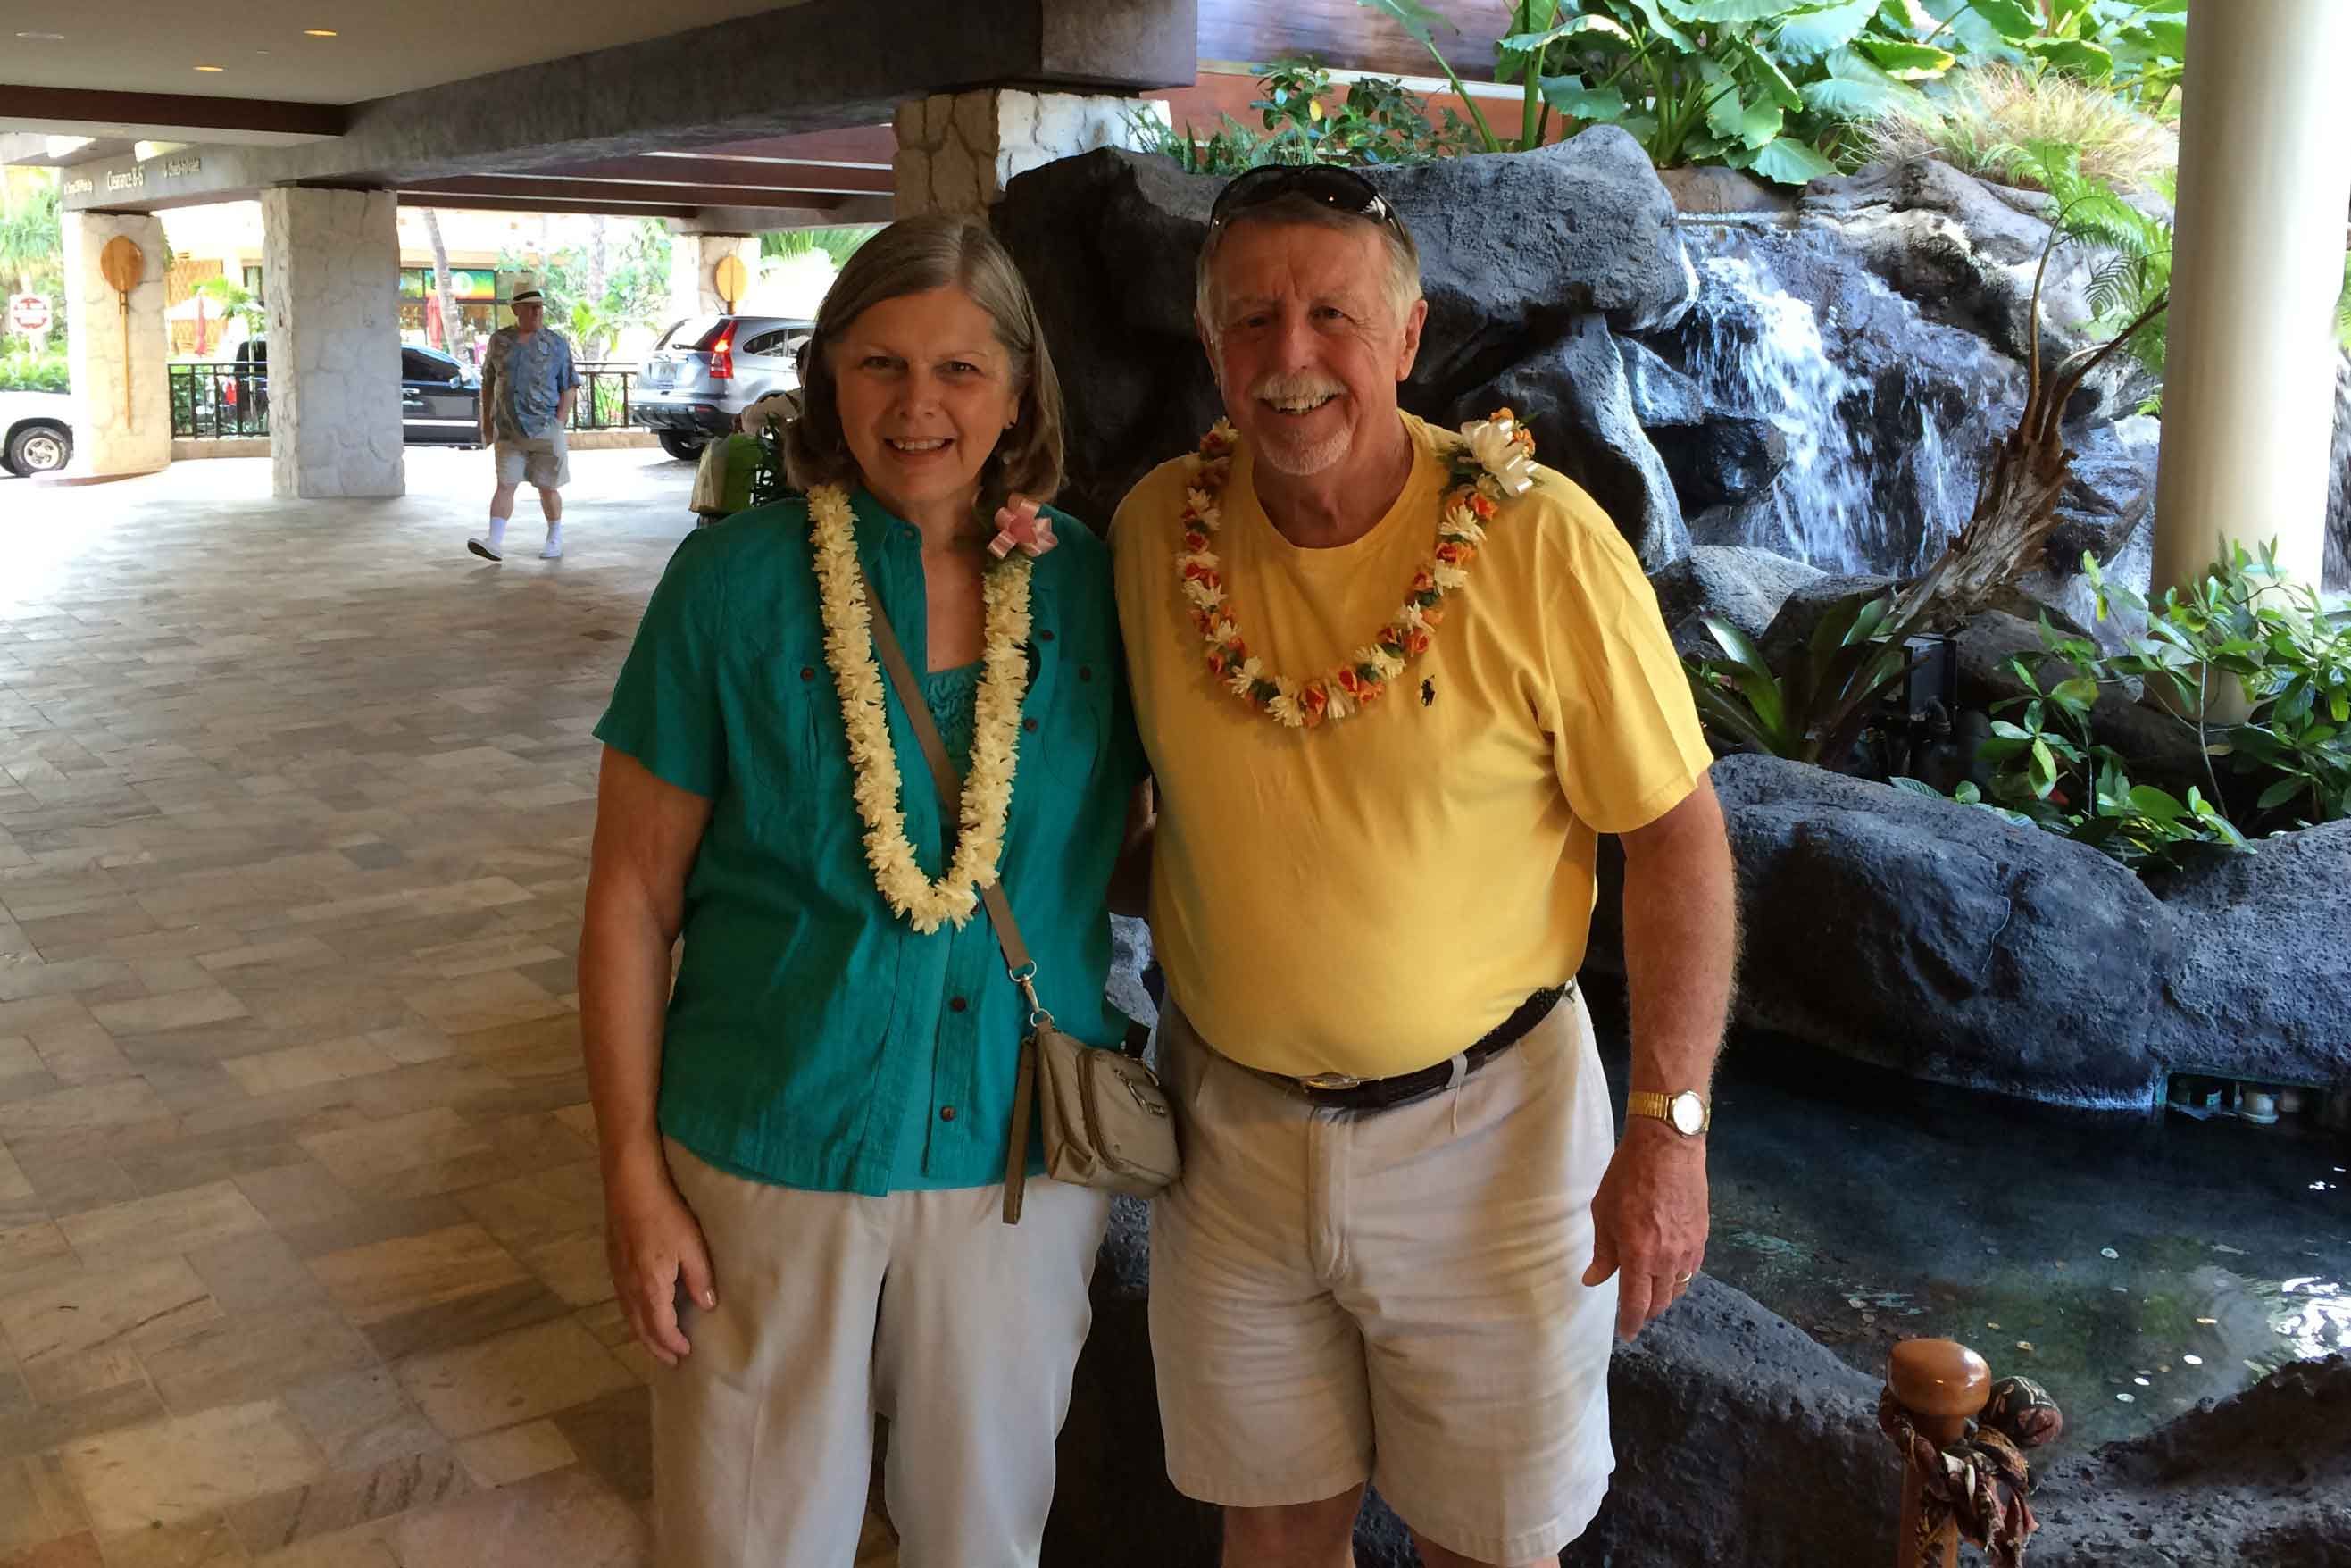 Berry alumni couple wear leis in front of a pond and rocks